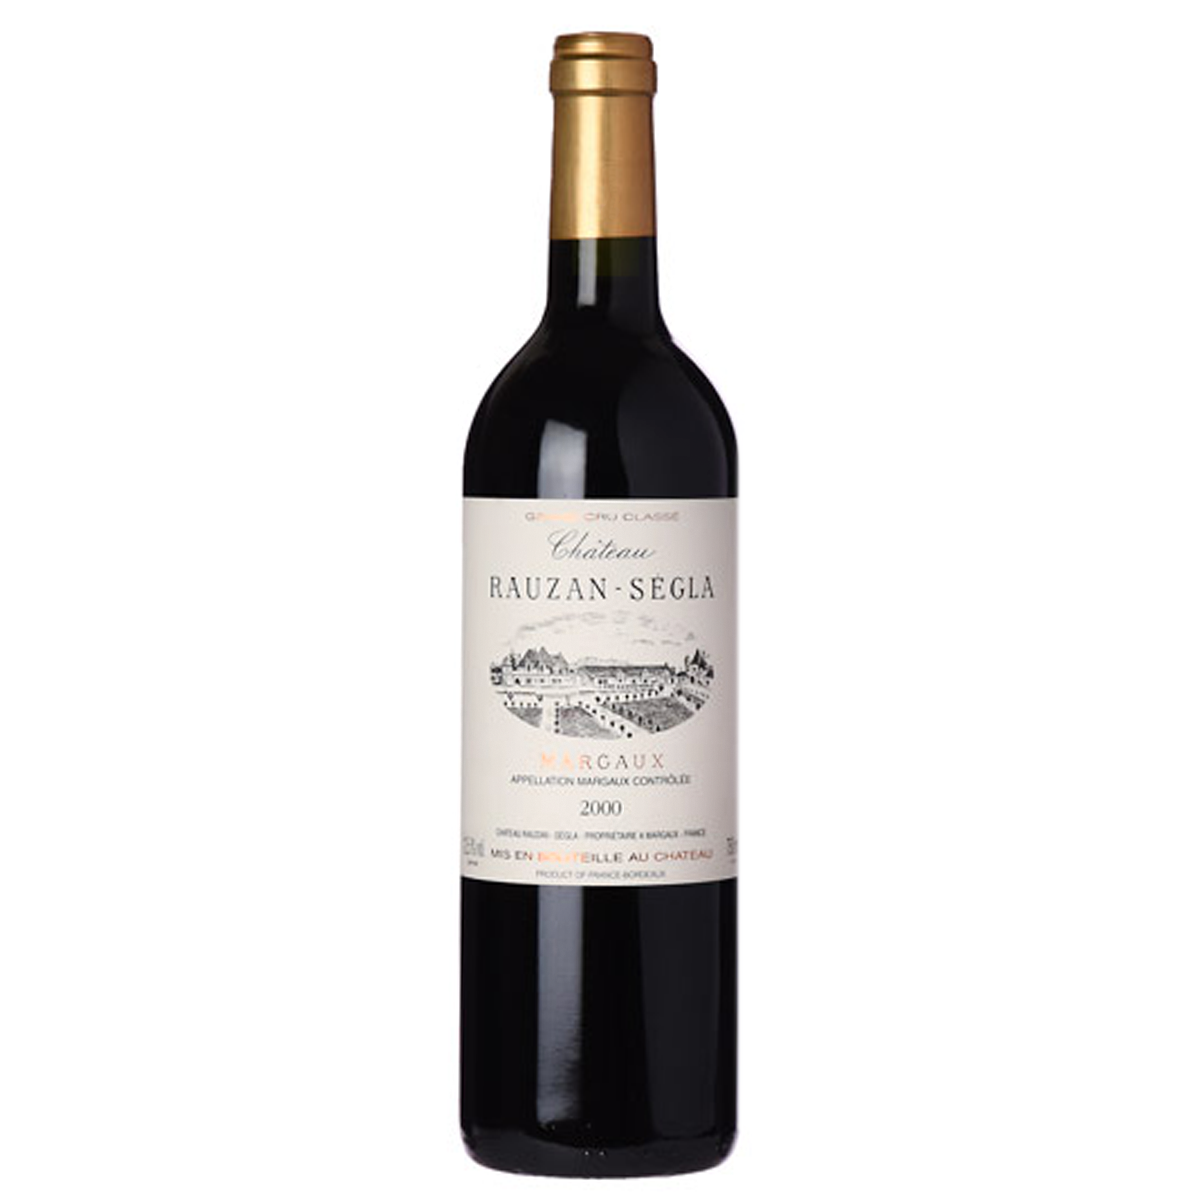 Under S$300: Bordeaux | 10 years on